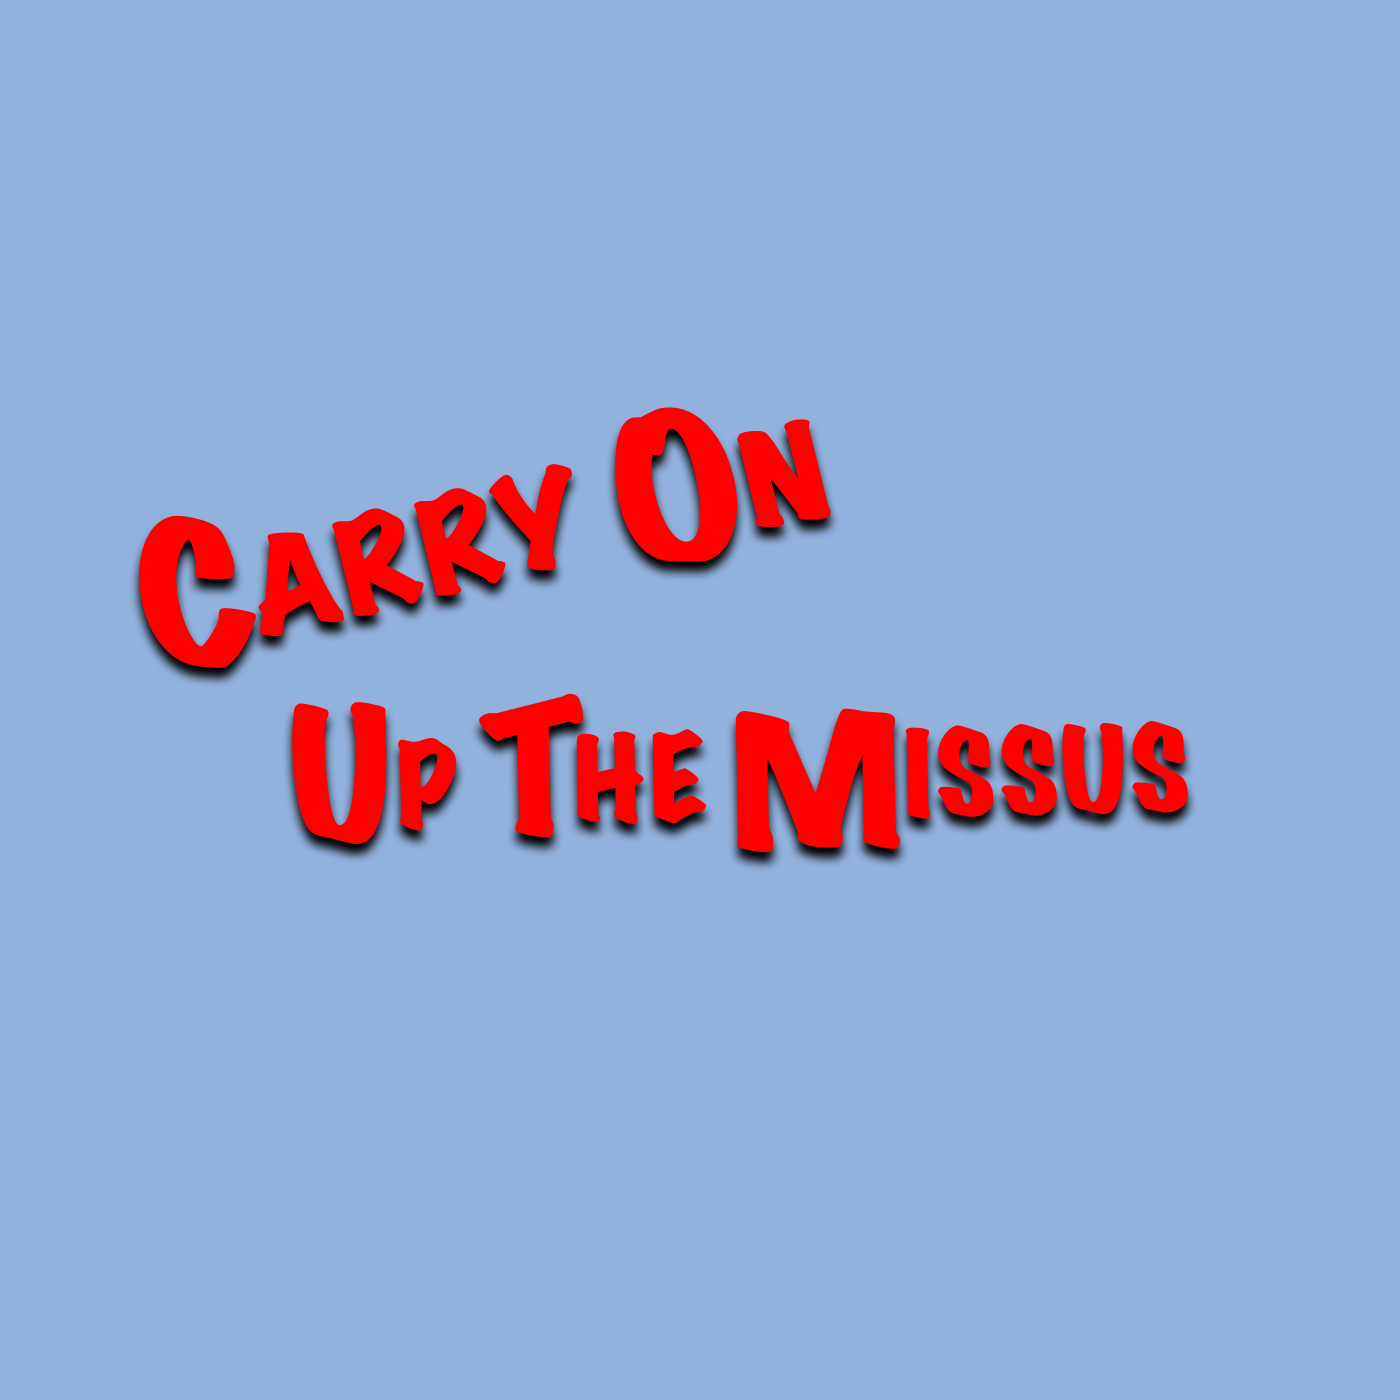 Carry On Up The Missus